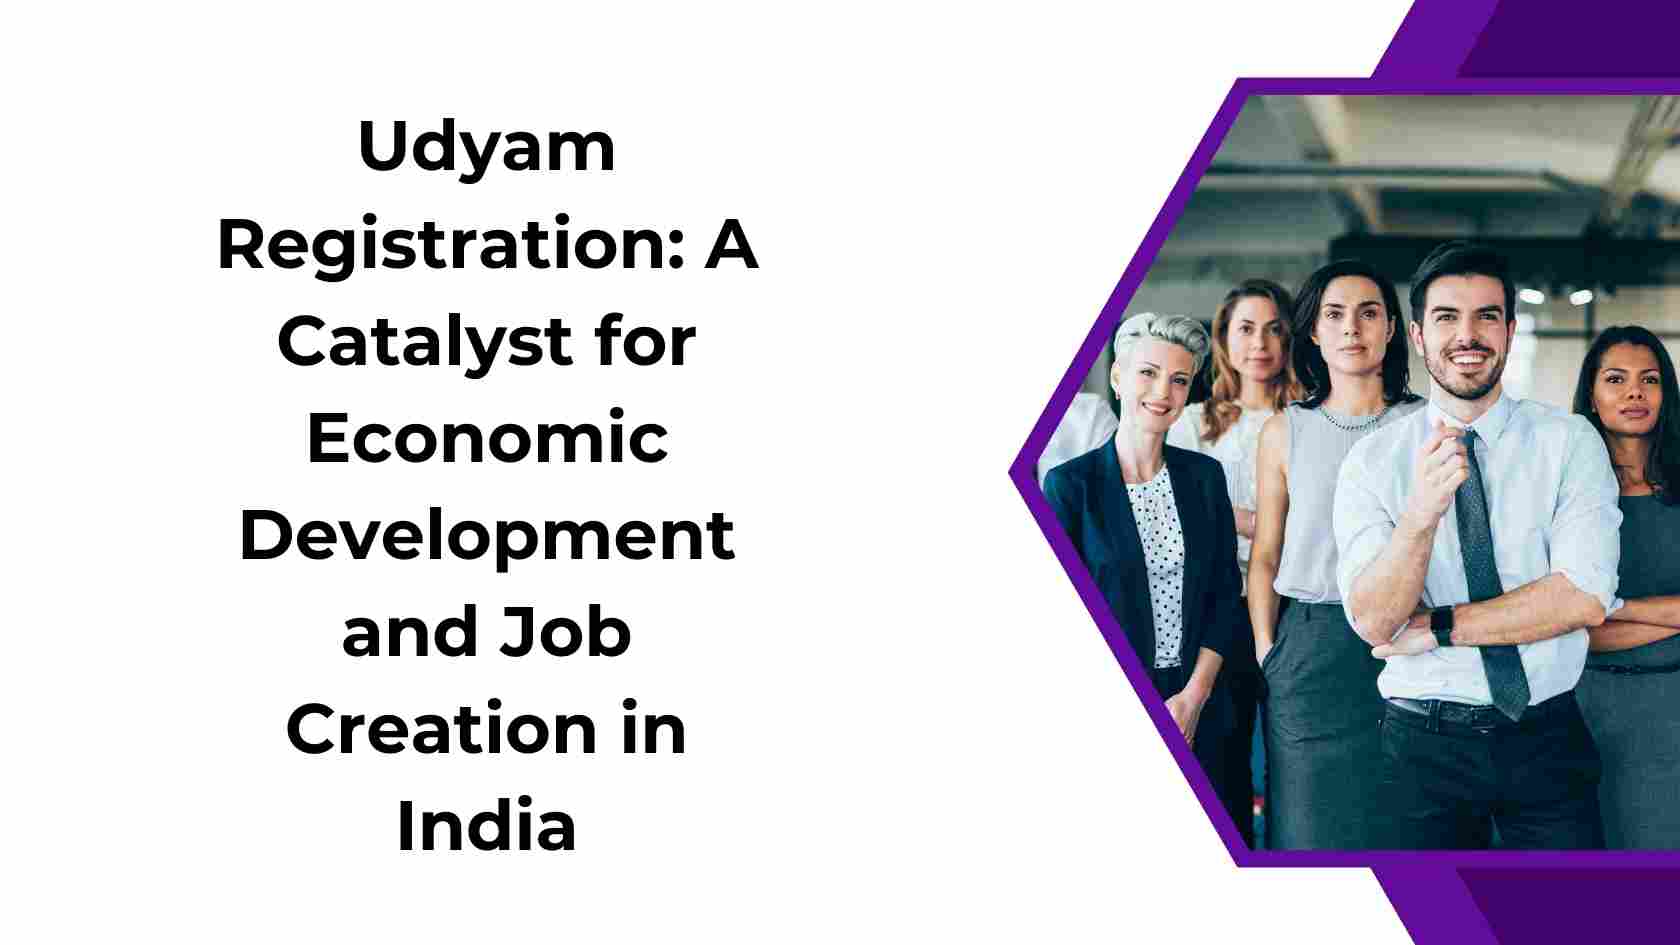 Udyam Registration A Catalyst for Economic Development and Job Creation in India